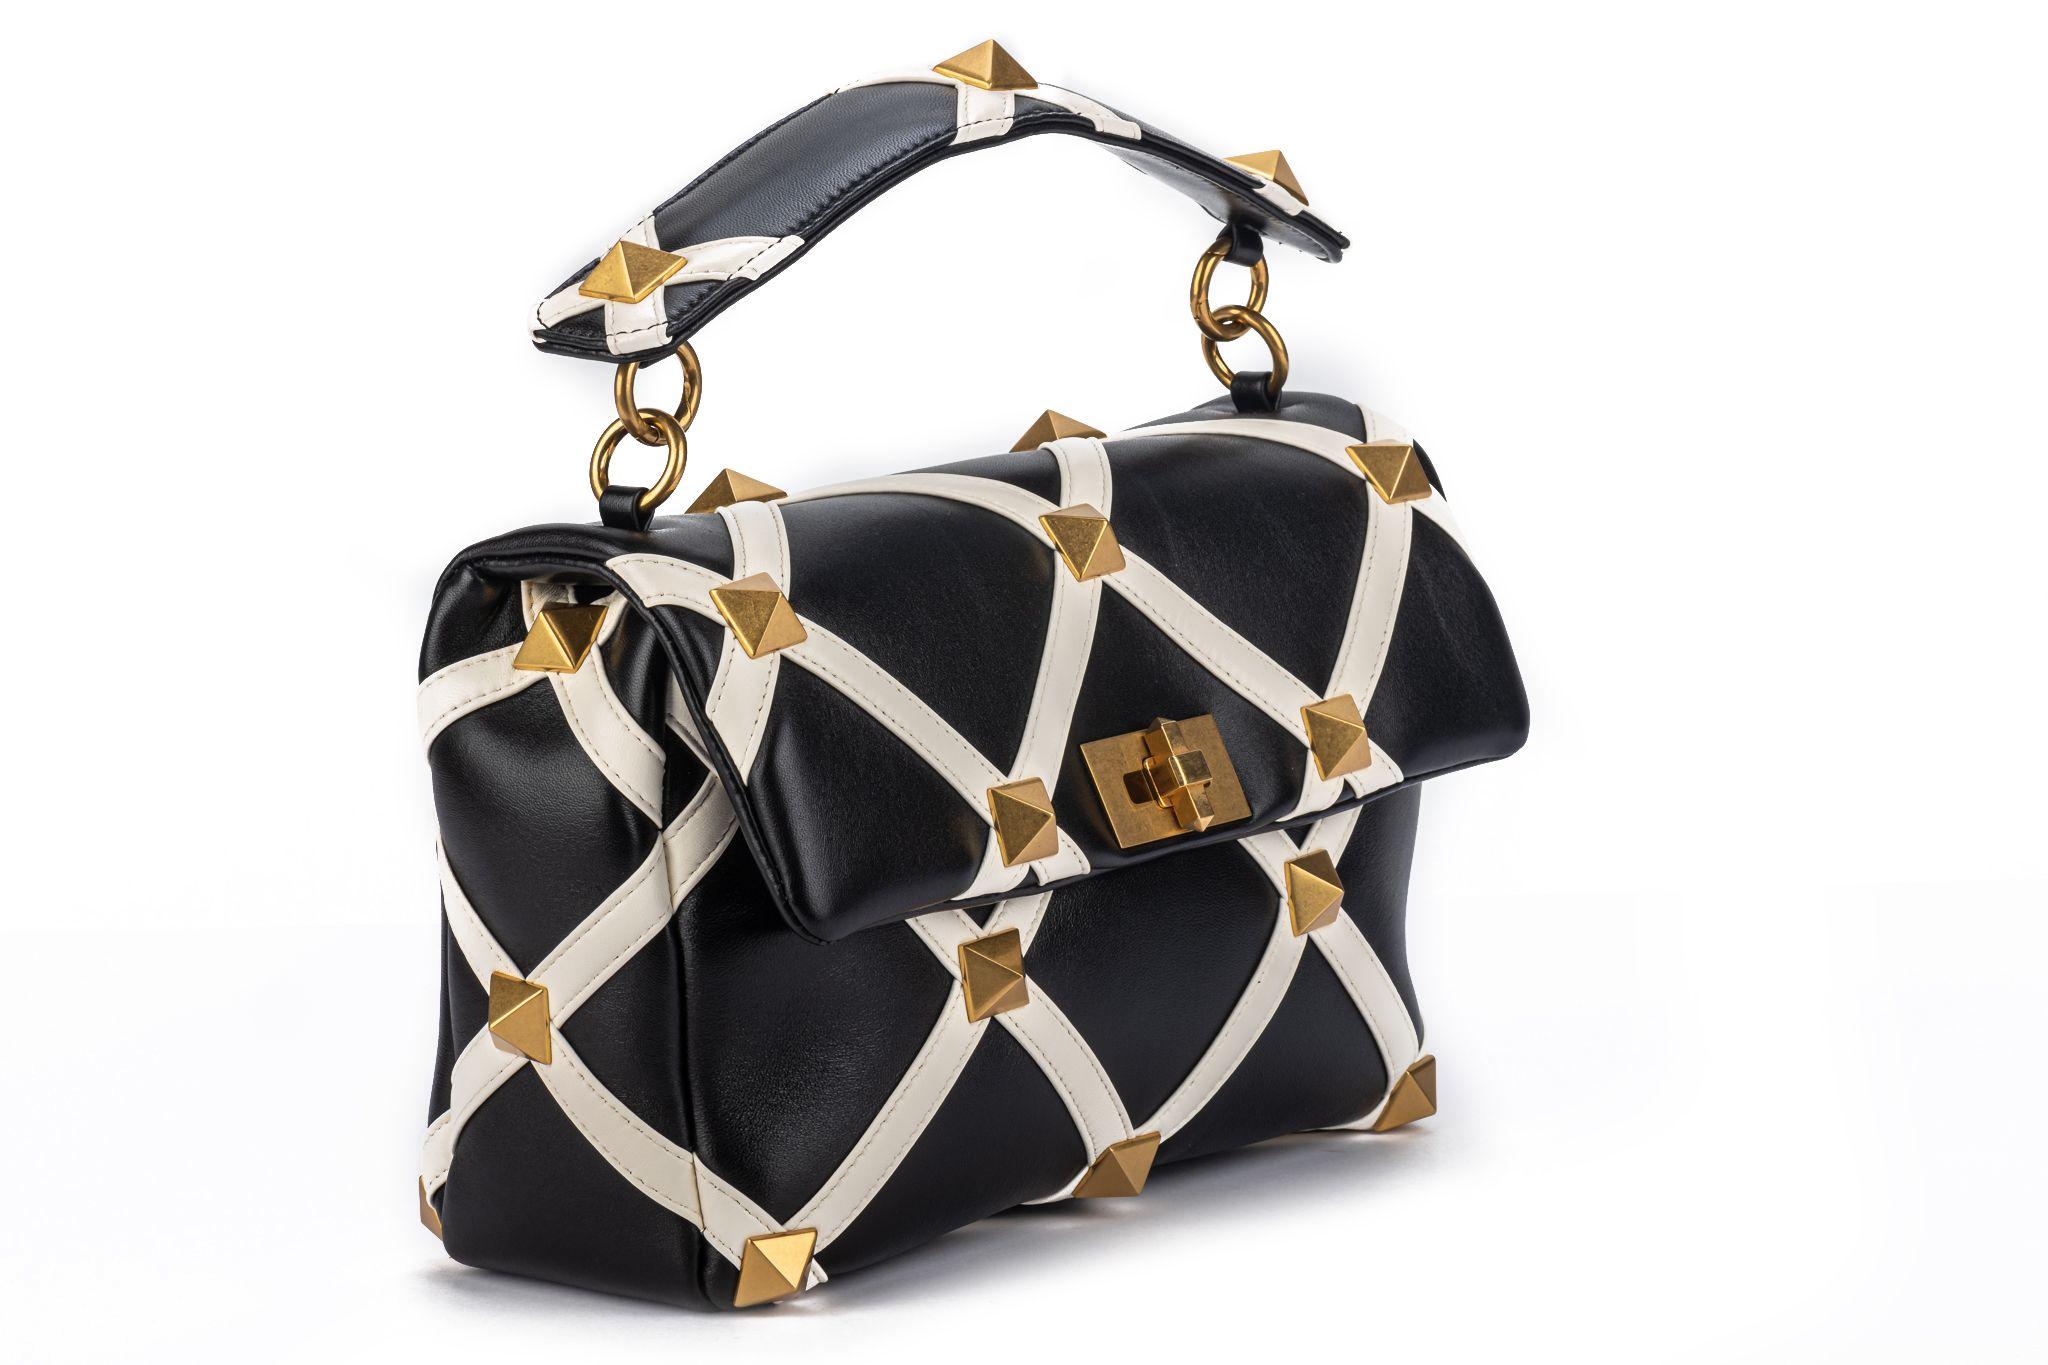 Valentino new black and white leather Roman stud large bag. Brushed gold studs. Can be worn 2 ways , both handle and chain strap are detachable. Handle drop 3”, shoulder drop 25”. Comes with original tag, booklet and dust cover.